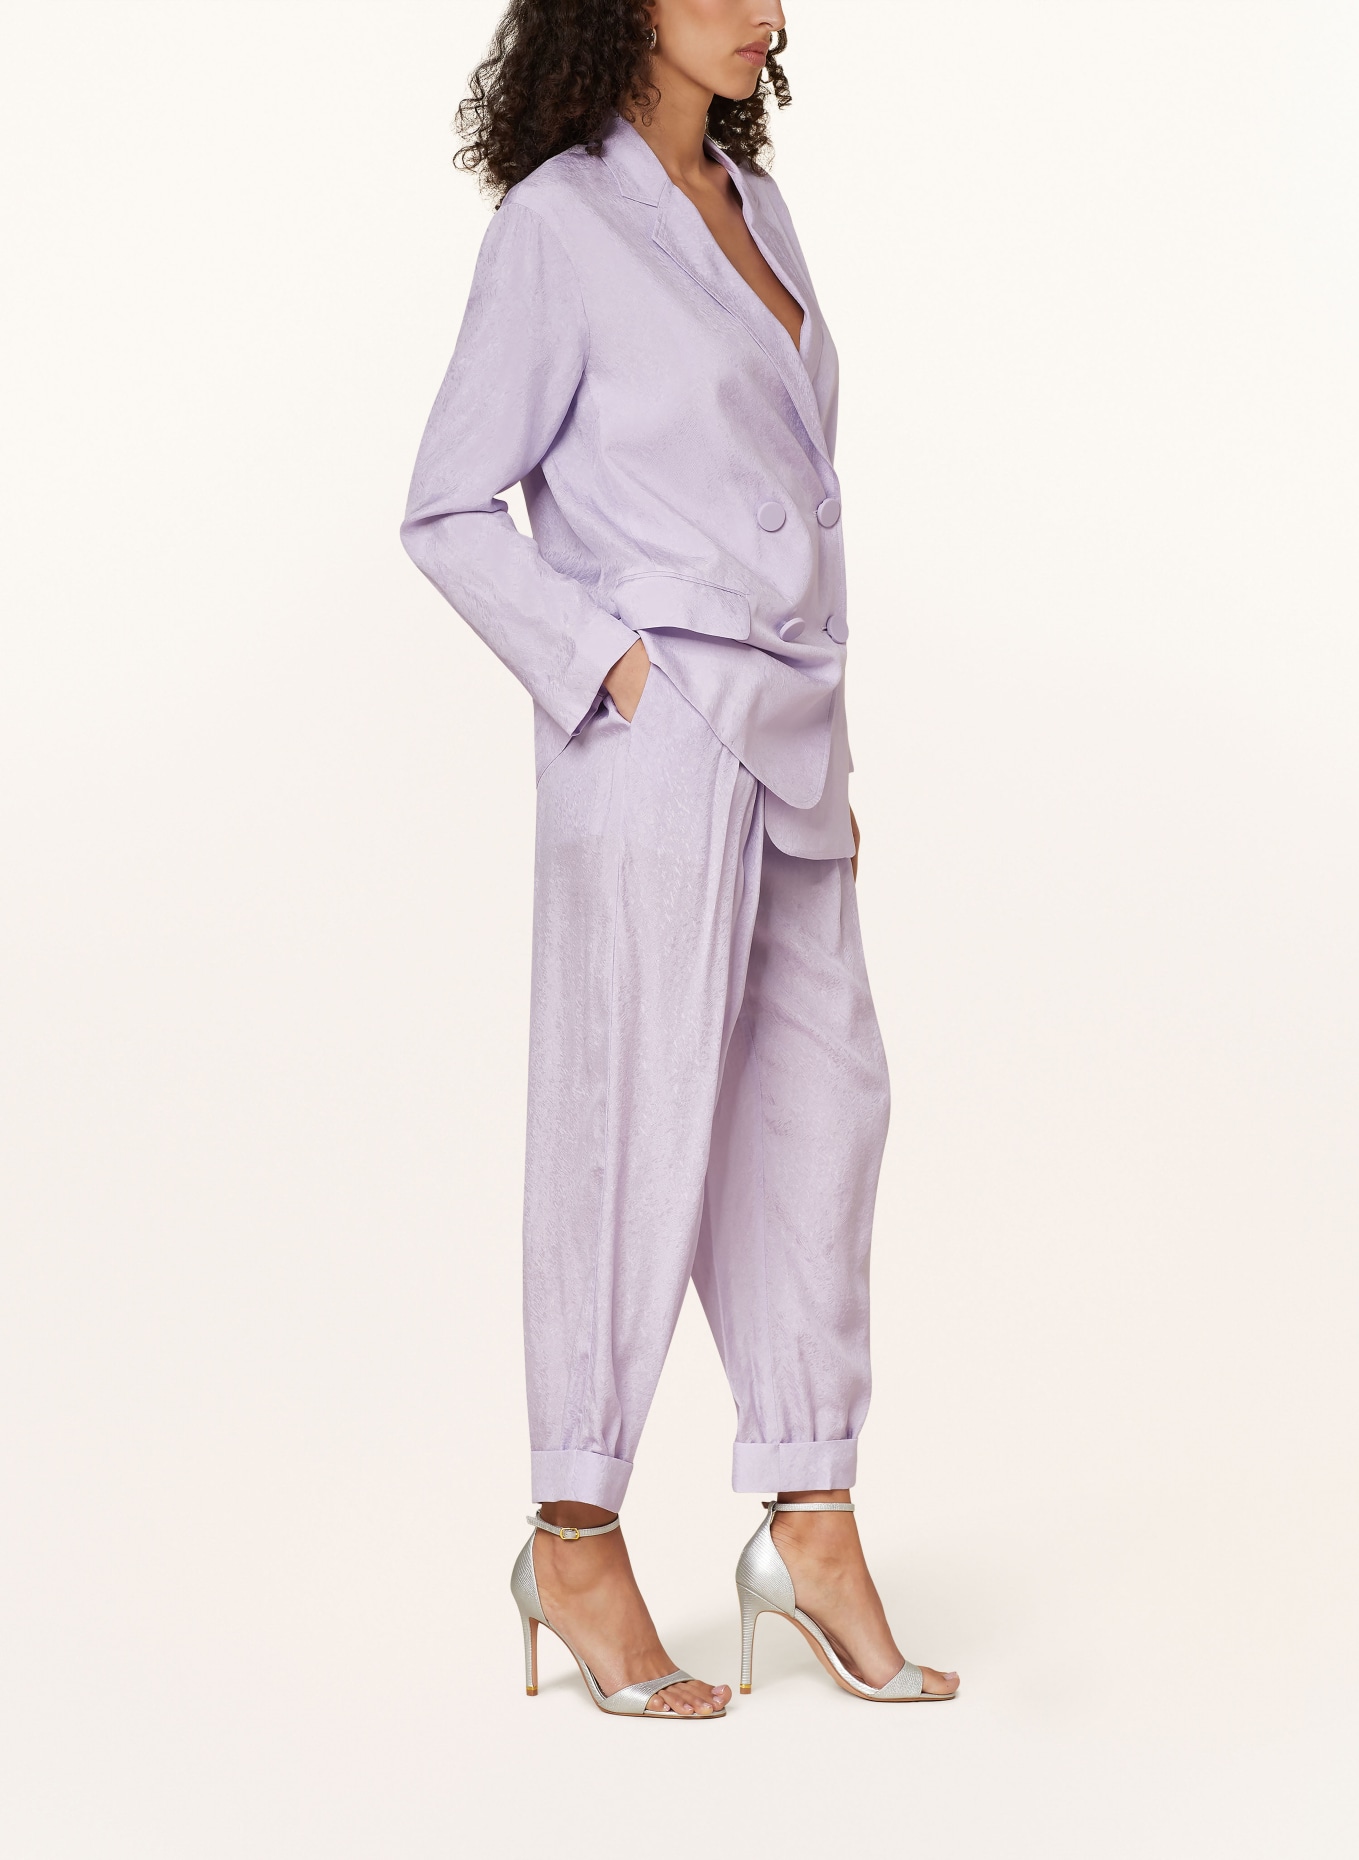 ARMANI EXCHANGE 7/8 trousers made of satin, Color: LIGHT PURPLE (Image 4)